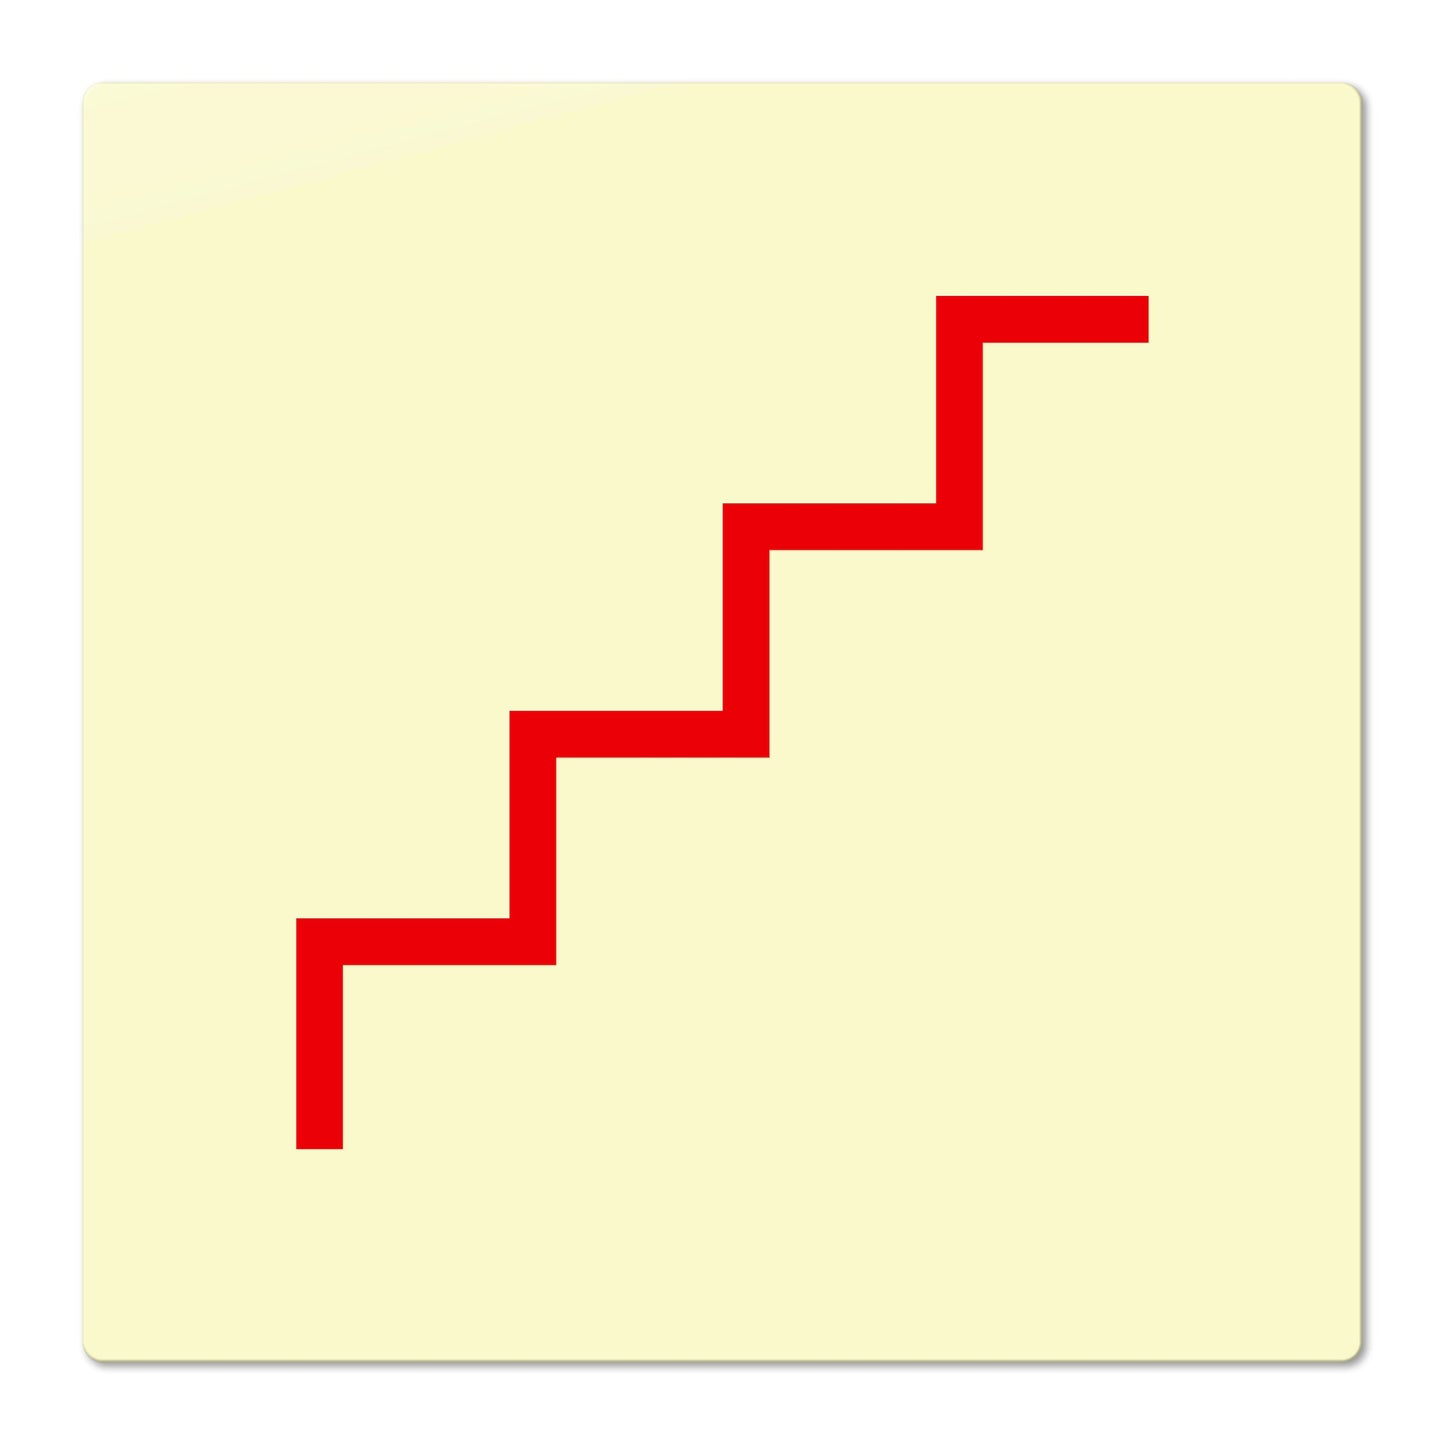 Stairs (Pictogram)